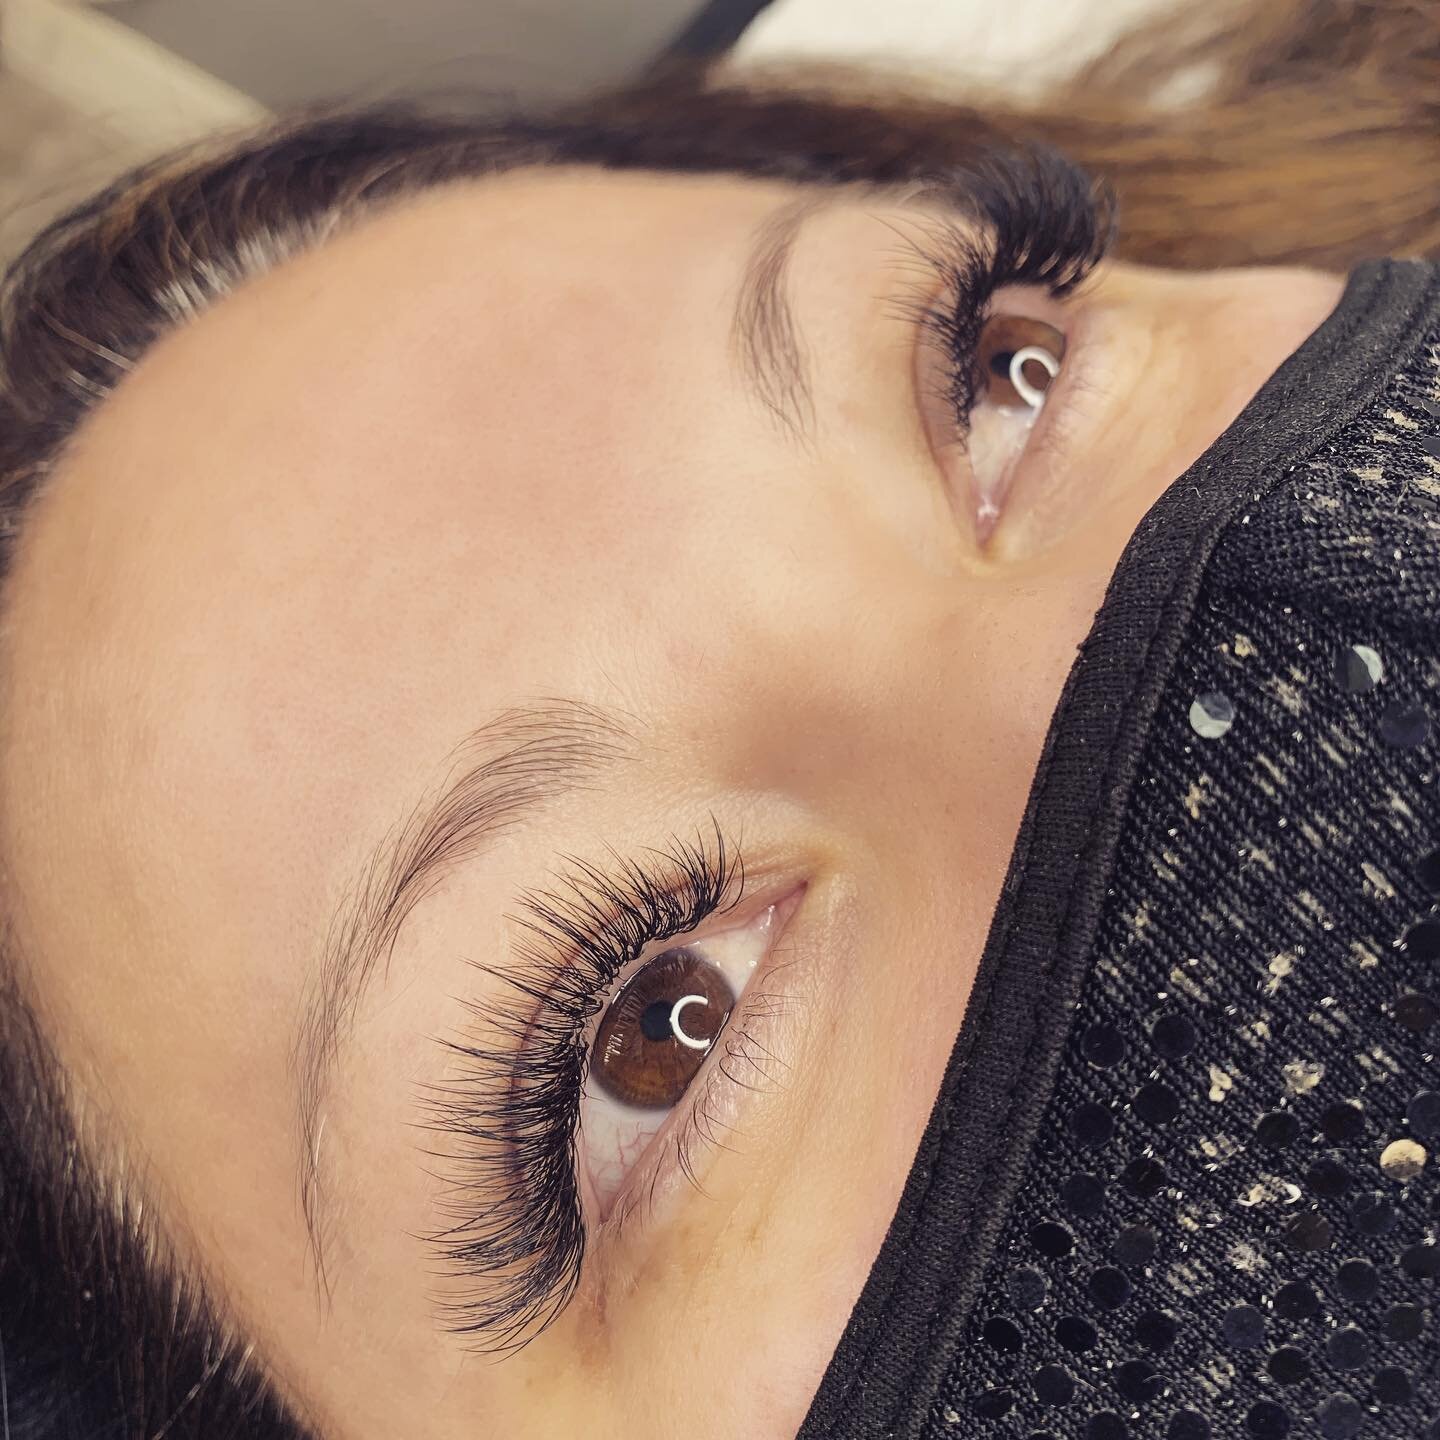 So much fun doing these hybrid wispy lashes ! #oclashes #gardengrove #lashextensions 
________________________
* 📆 By appointment only 
* Book online www.beautybymarilyn.com
* Any questions 📲 text. (714) 814-7288
📍8550 Garden Grove Blvd #213 
  Ga